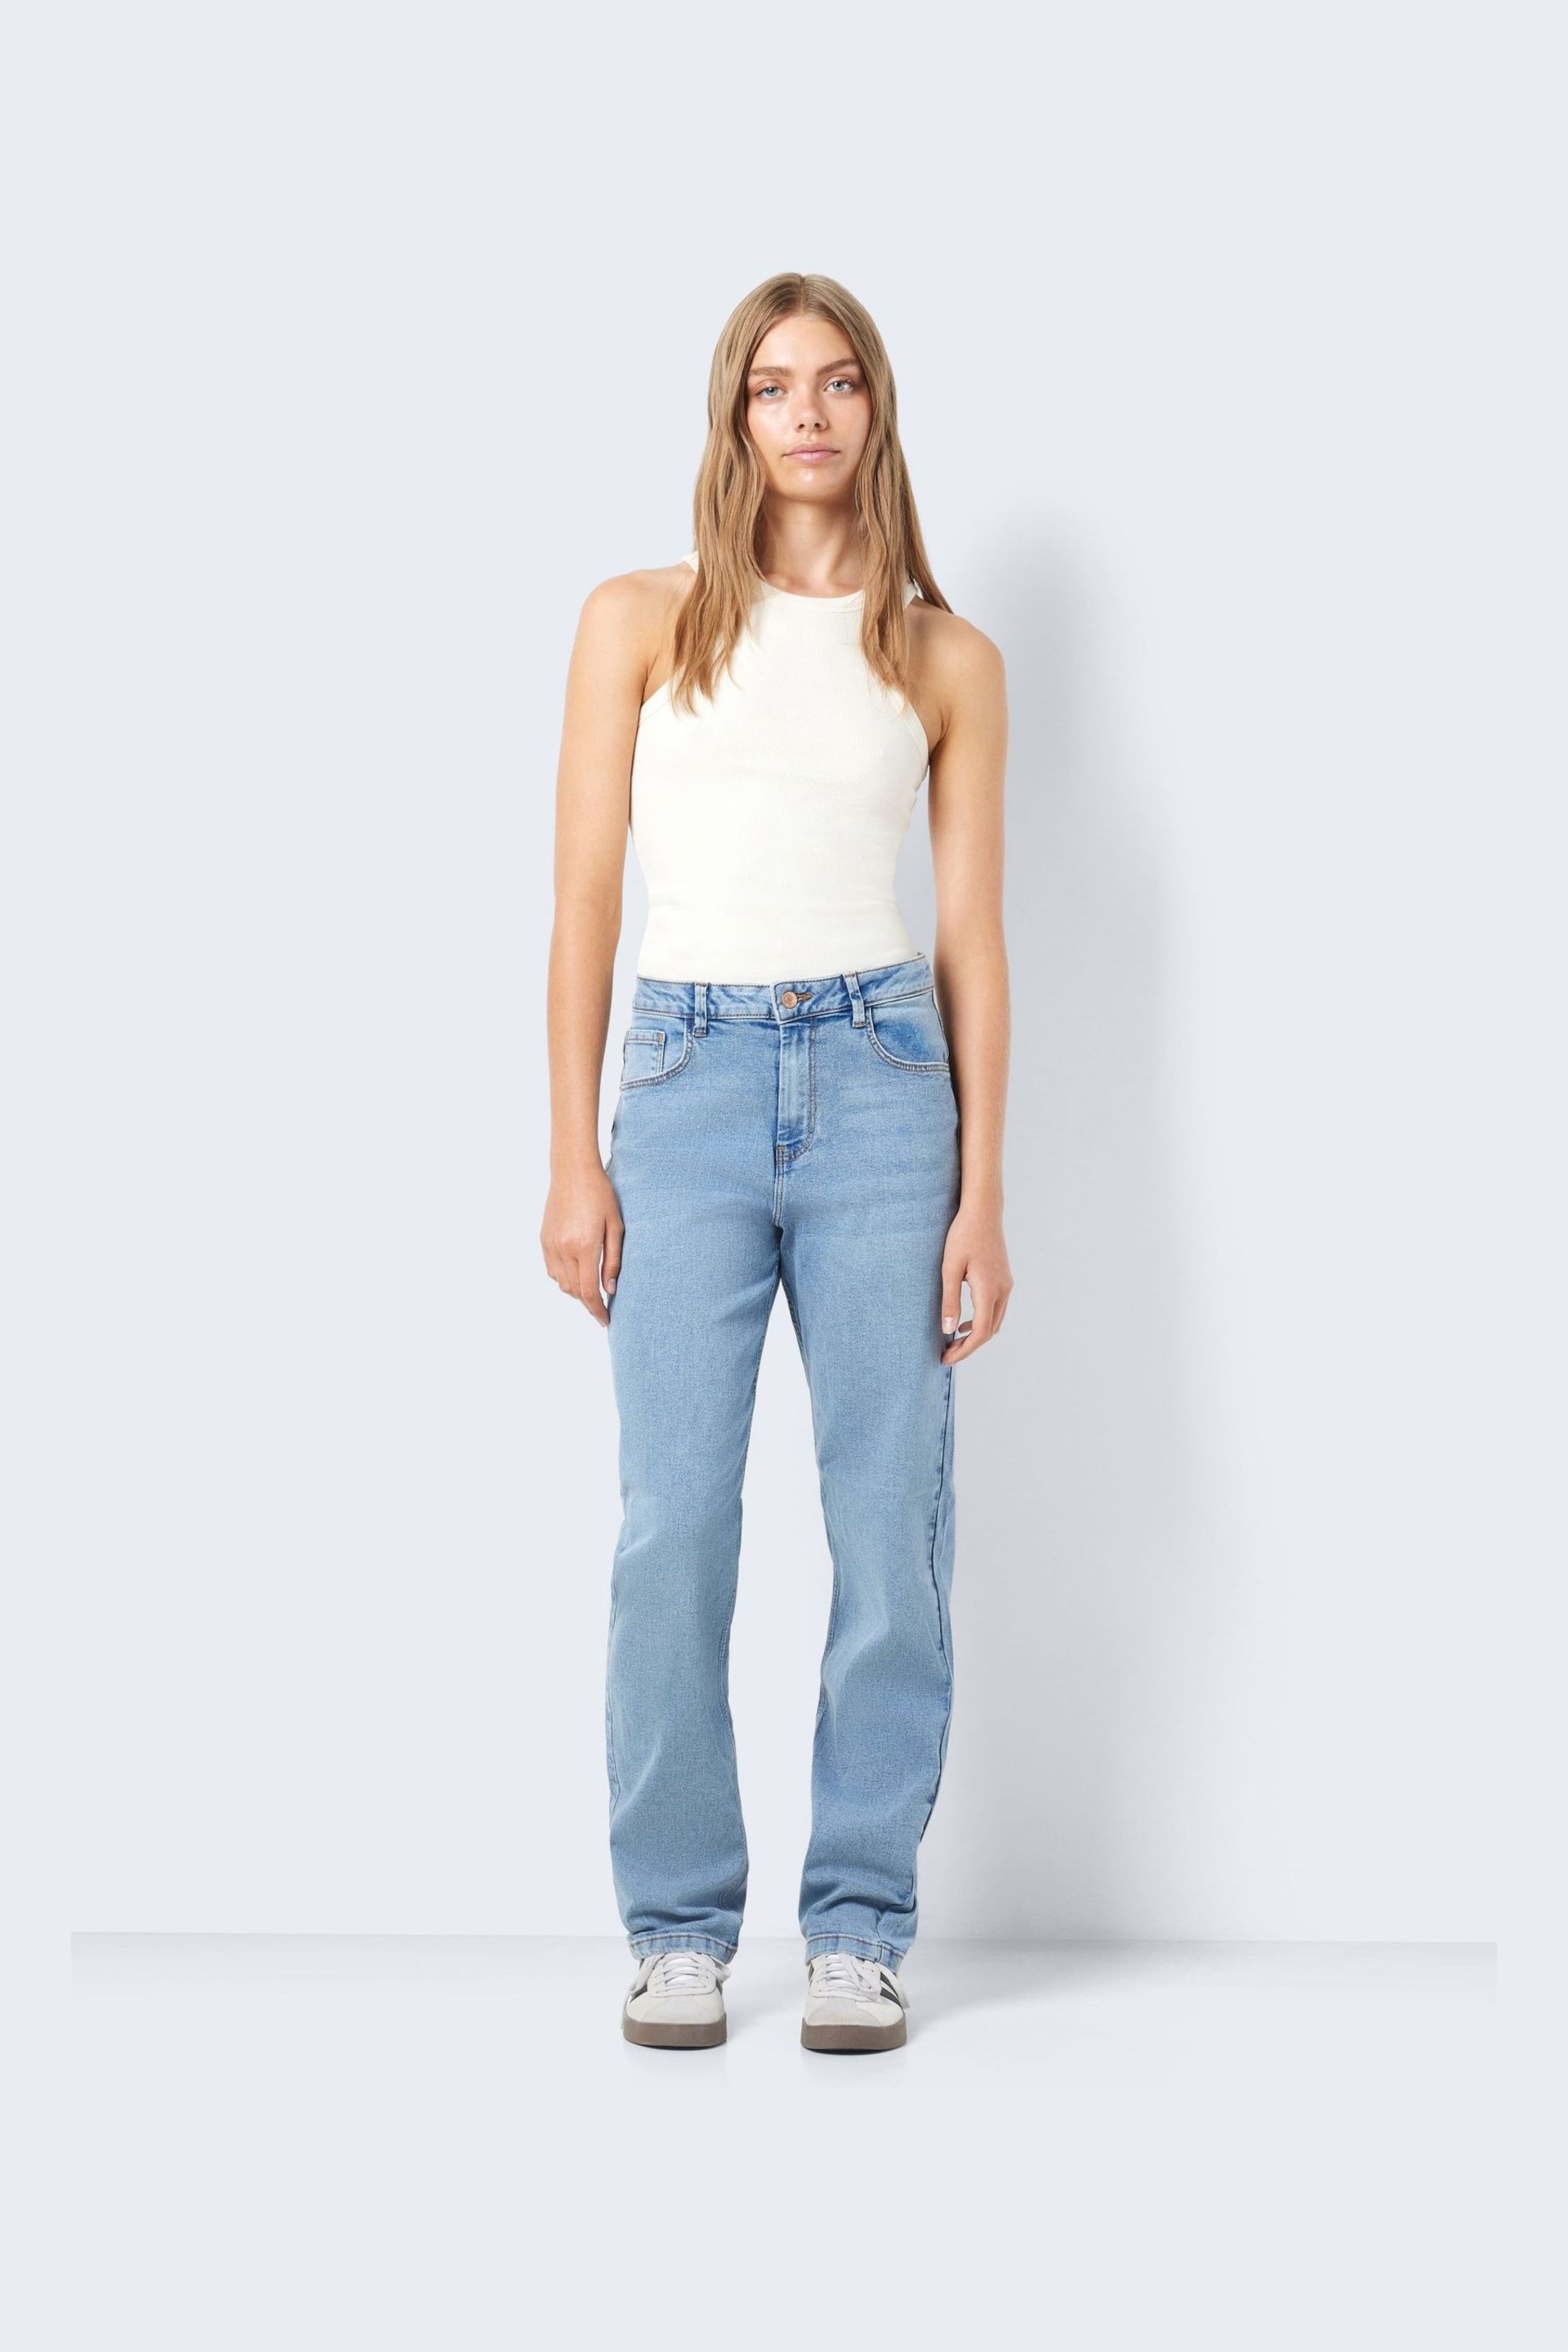 NOISY MAY Blue High Waisted Straight Leg Jeans - Image 4 of 8